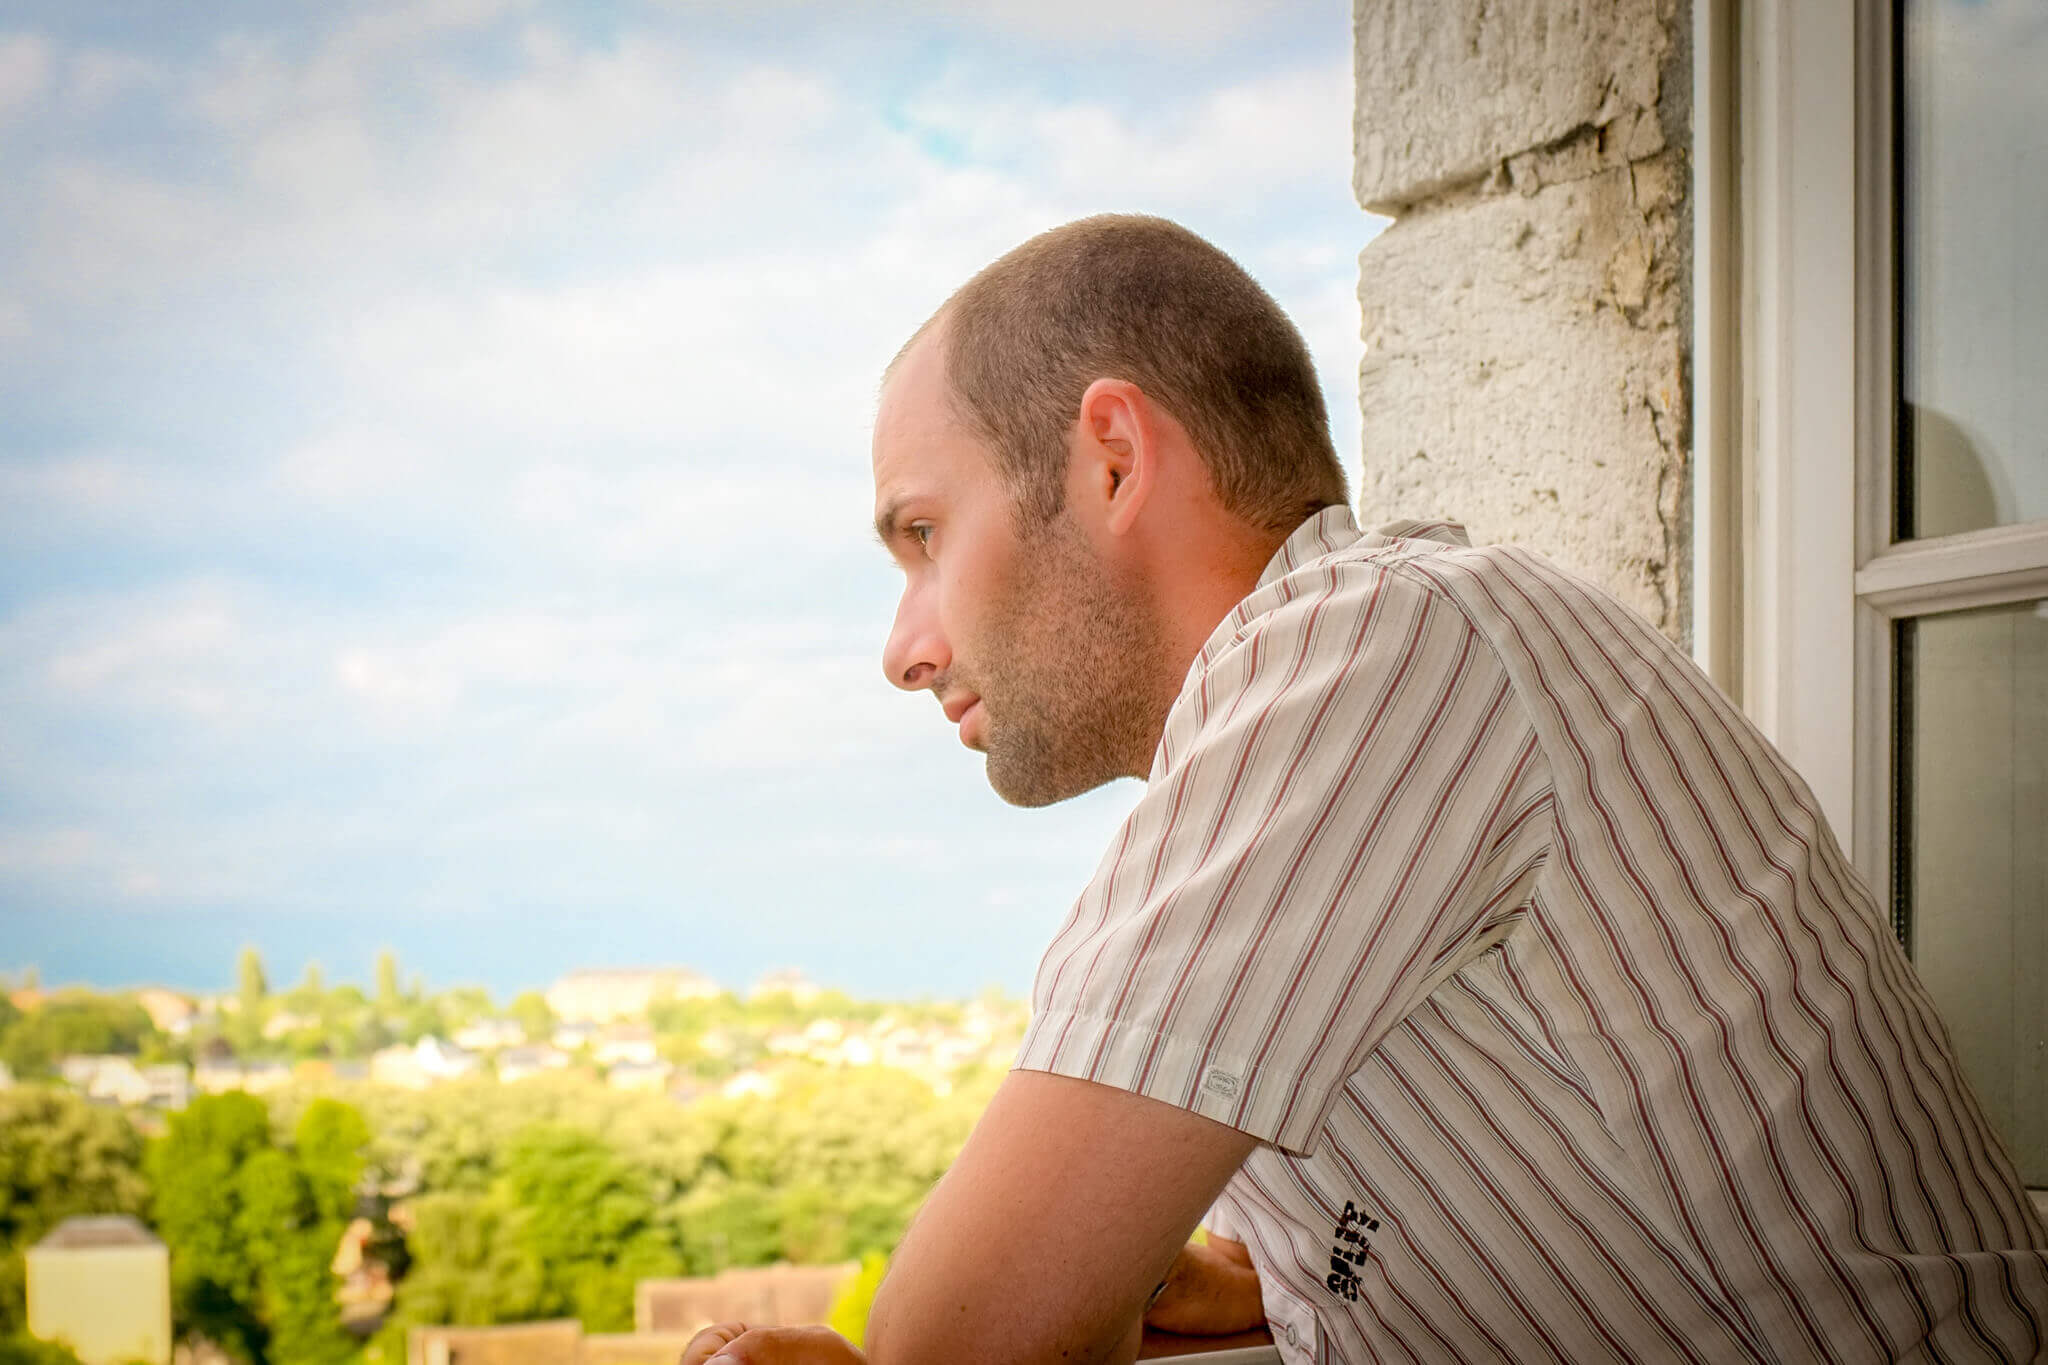 Me, looking out of our window from Hôtellerie Saint-Yves, overlooking Chartres, France